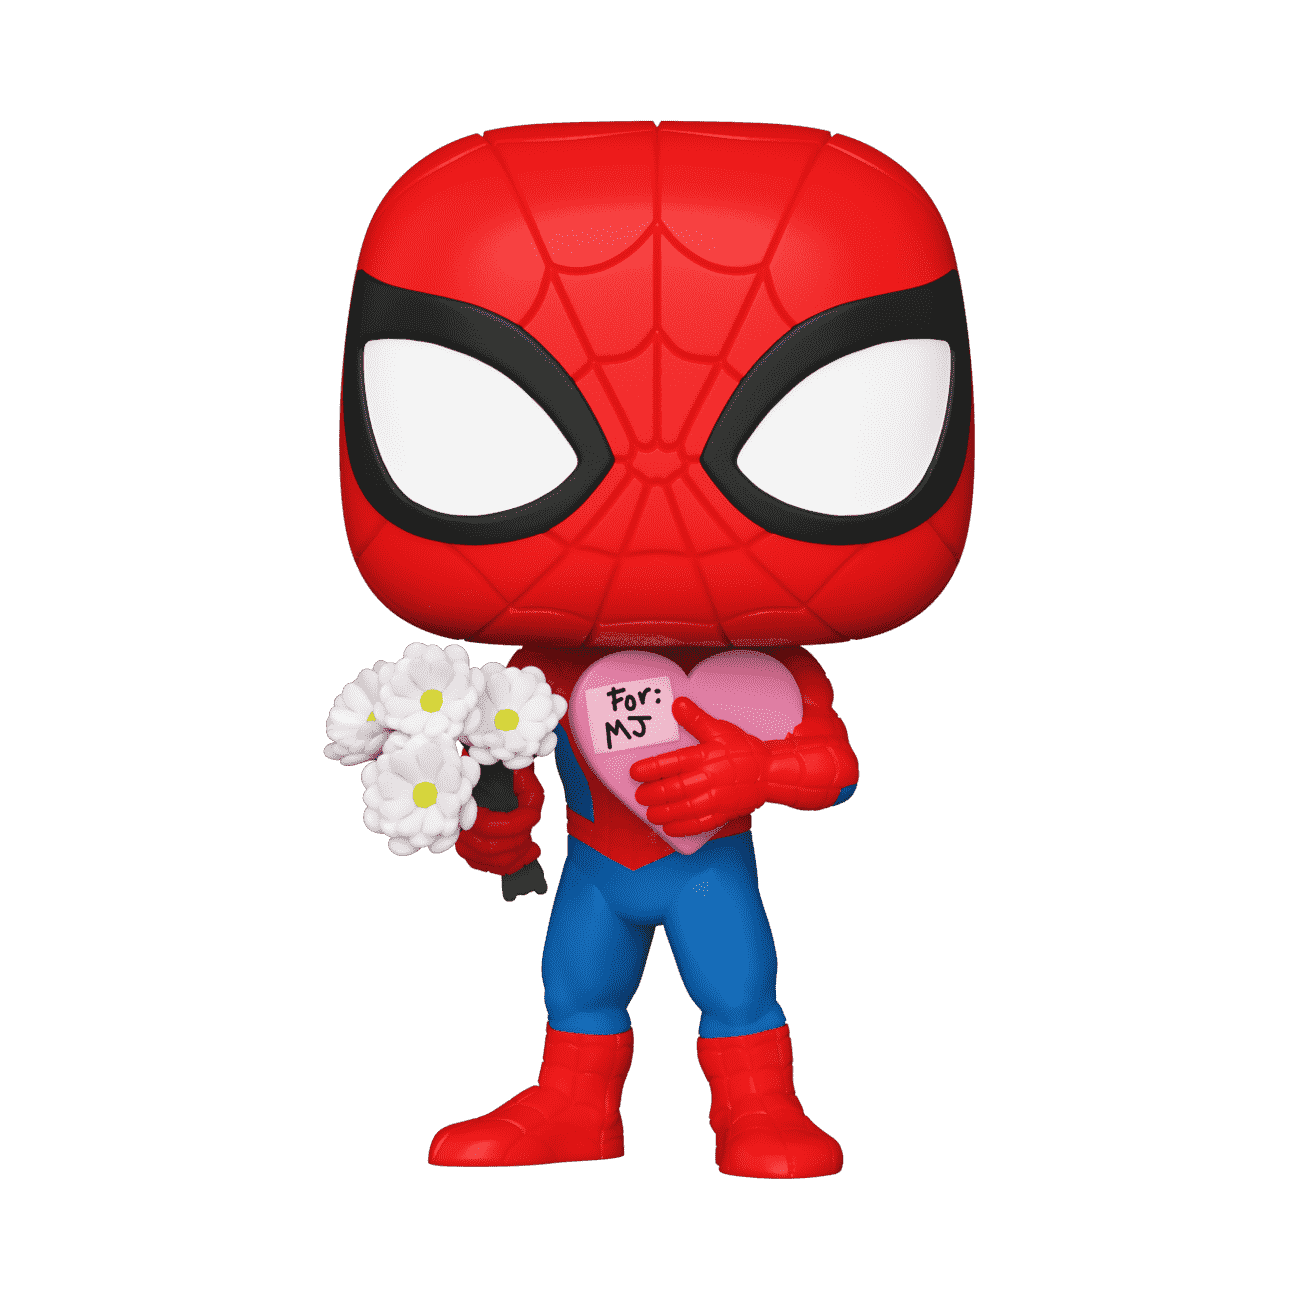  Funko Pop! Marvel: Valentine's Series - Spider-Man with Flowers  Shop Exclusive : Toys & Games